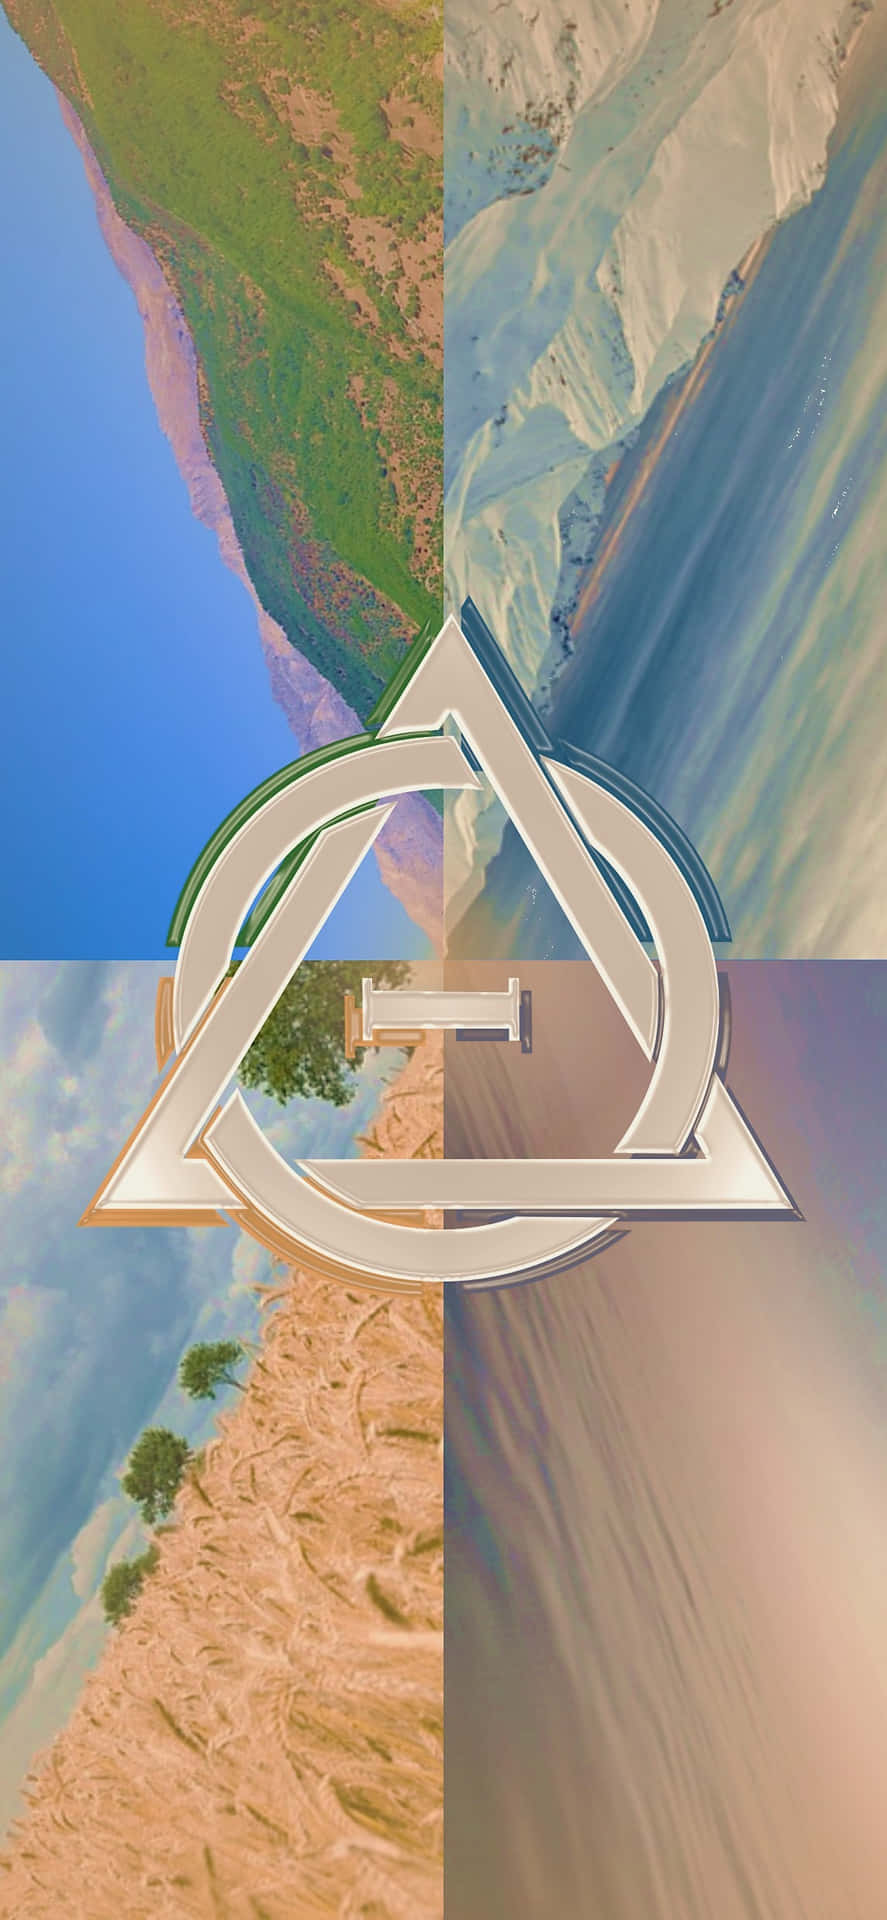 Therian Symbol Nature Collage Wallpaper